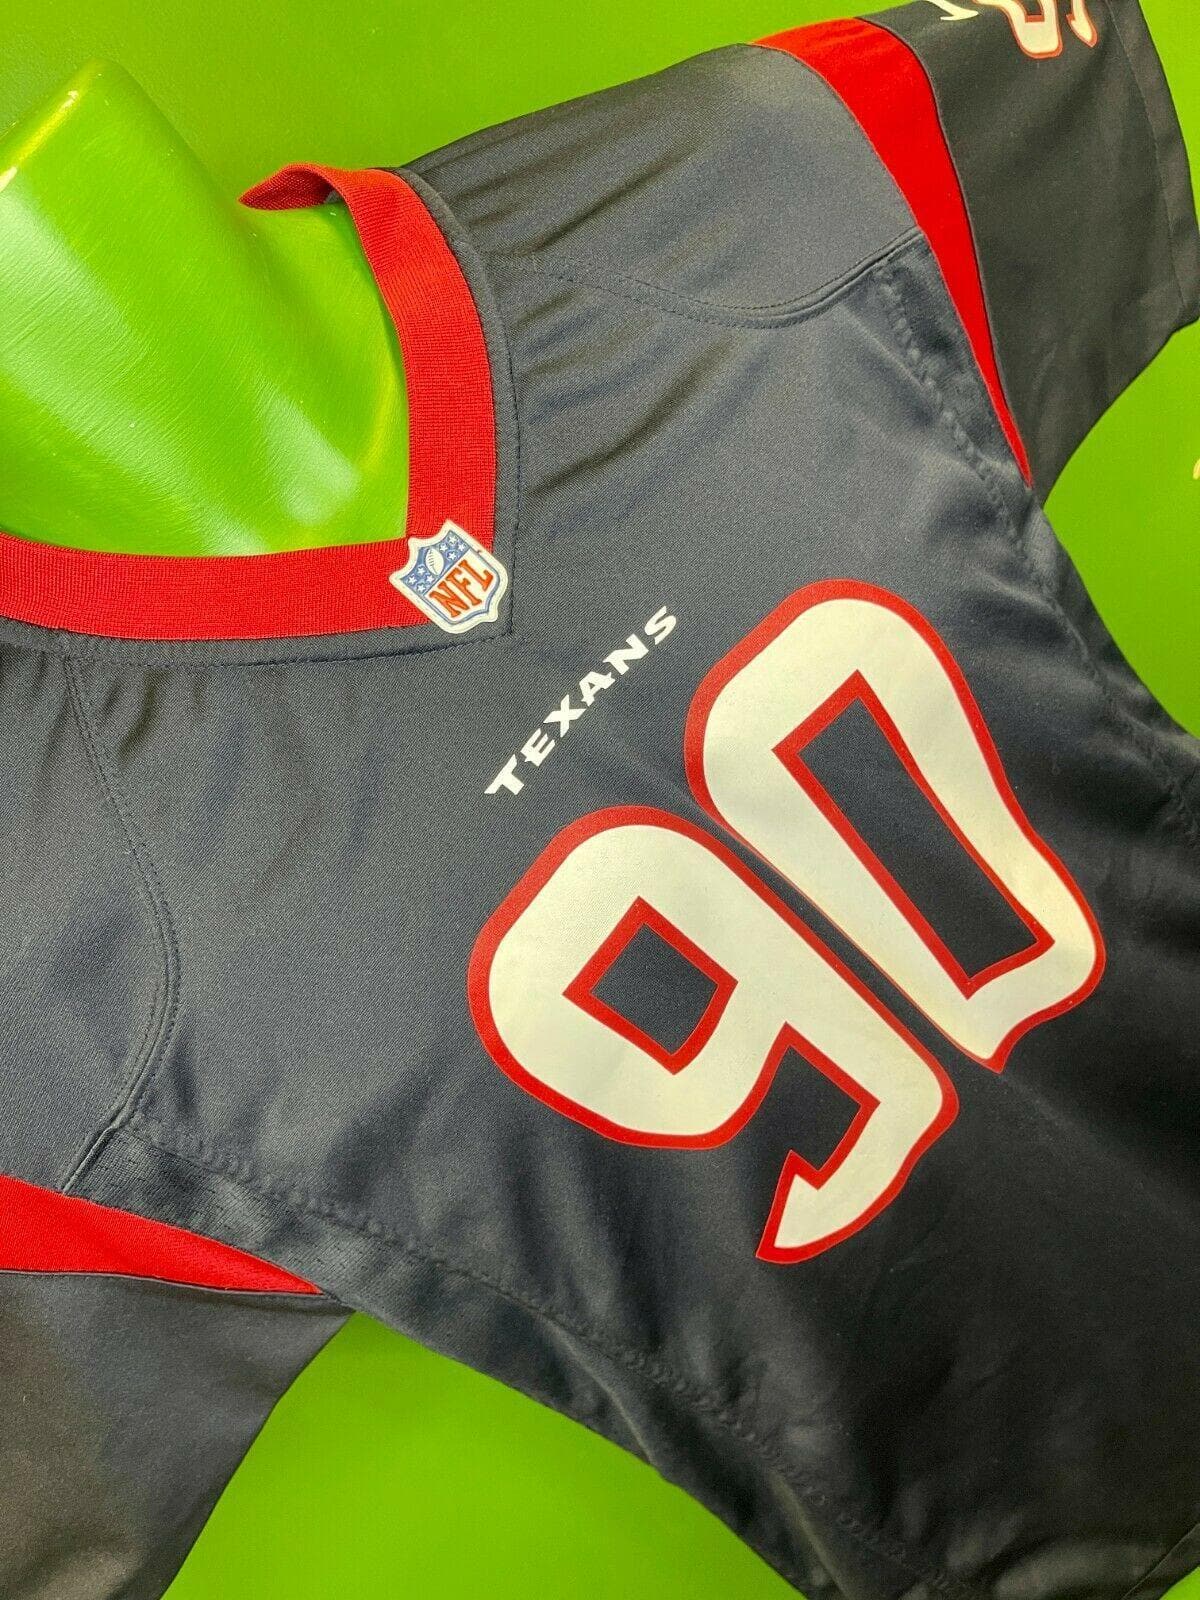 NFL Houston Texans Jadeveon Clowney #90 Game Jersey Youth Large